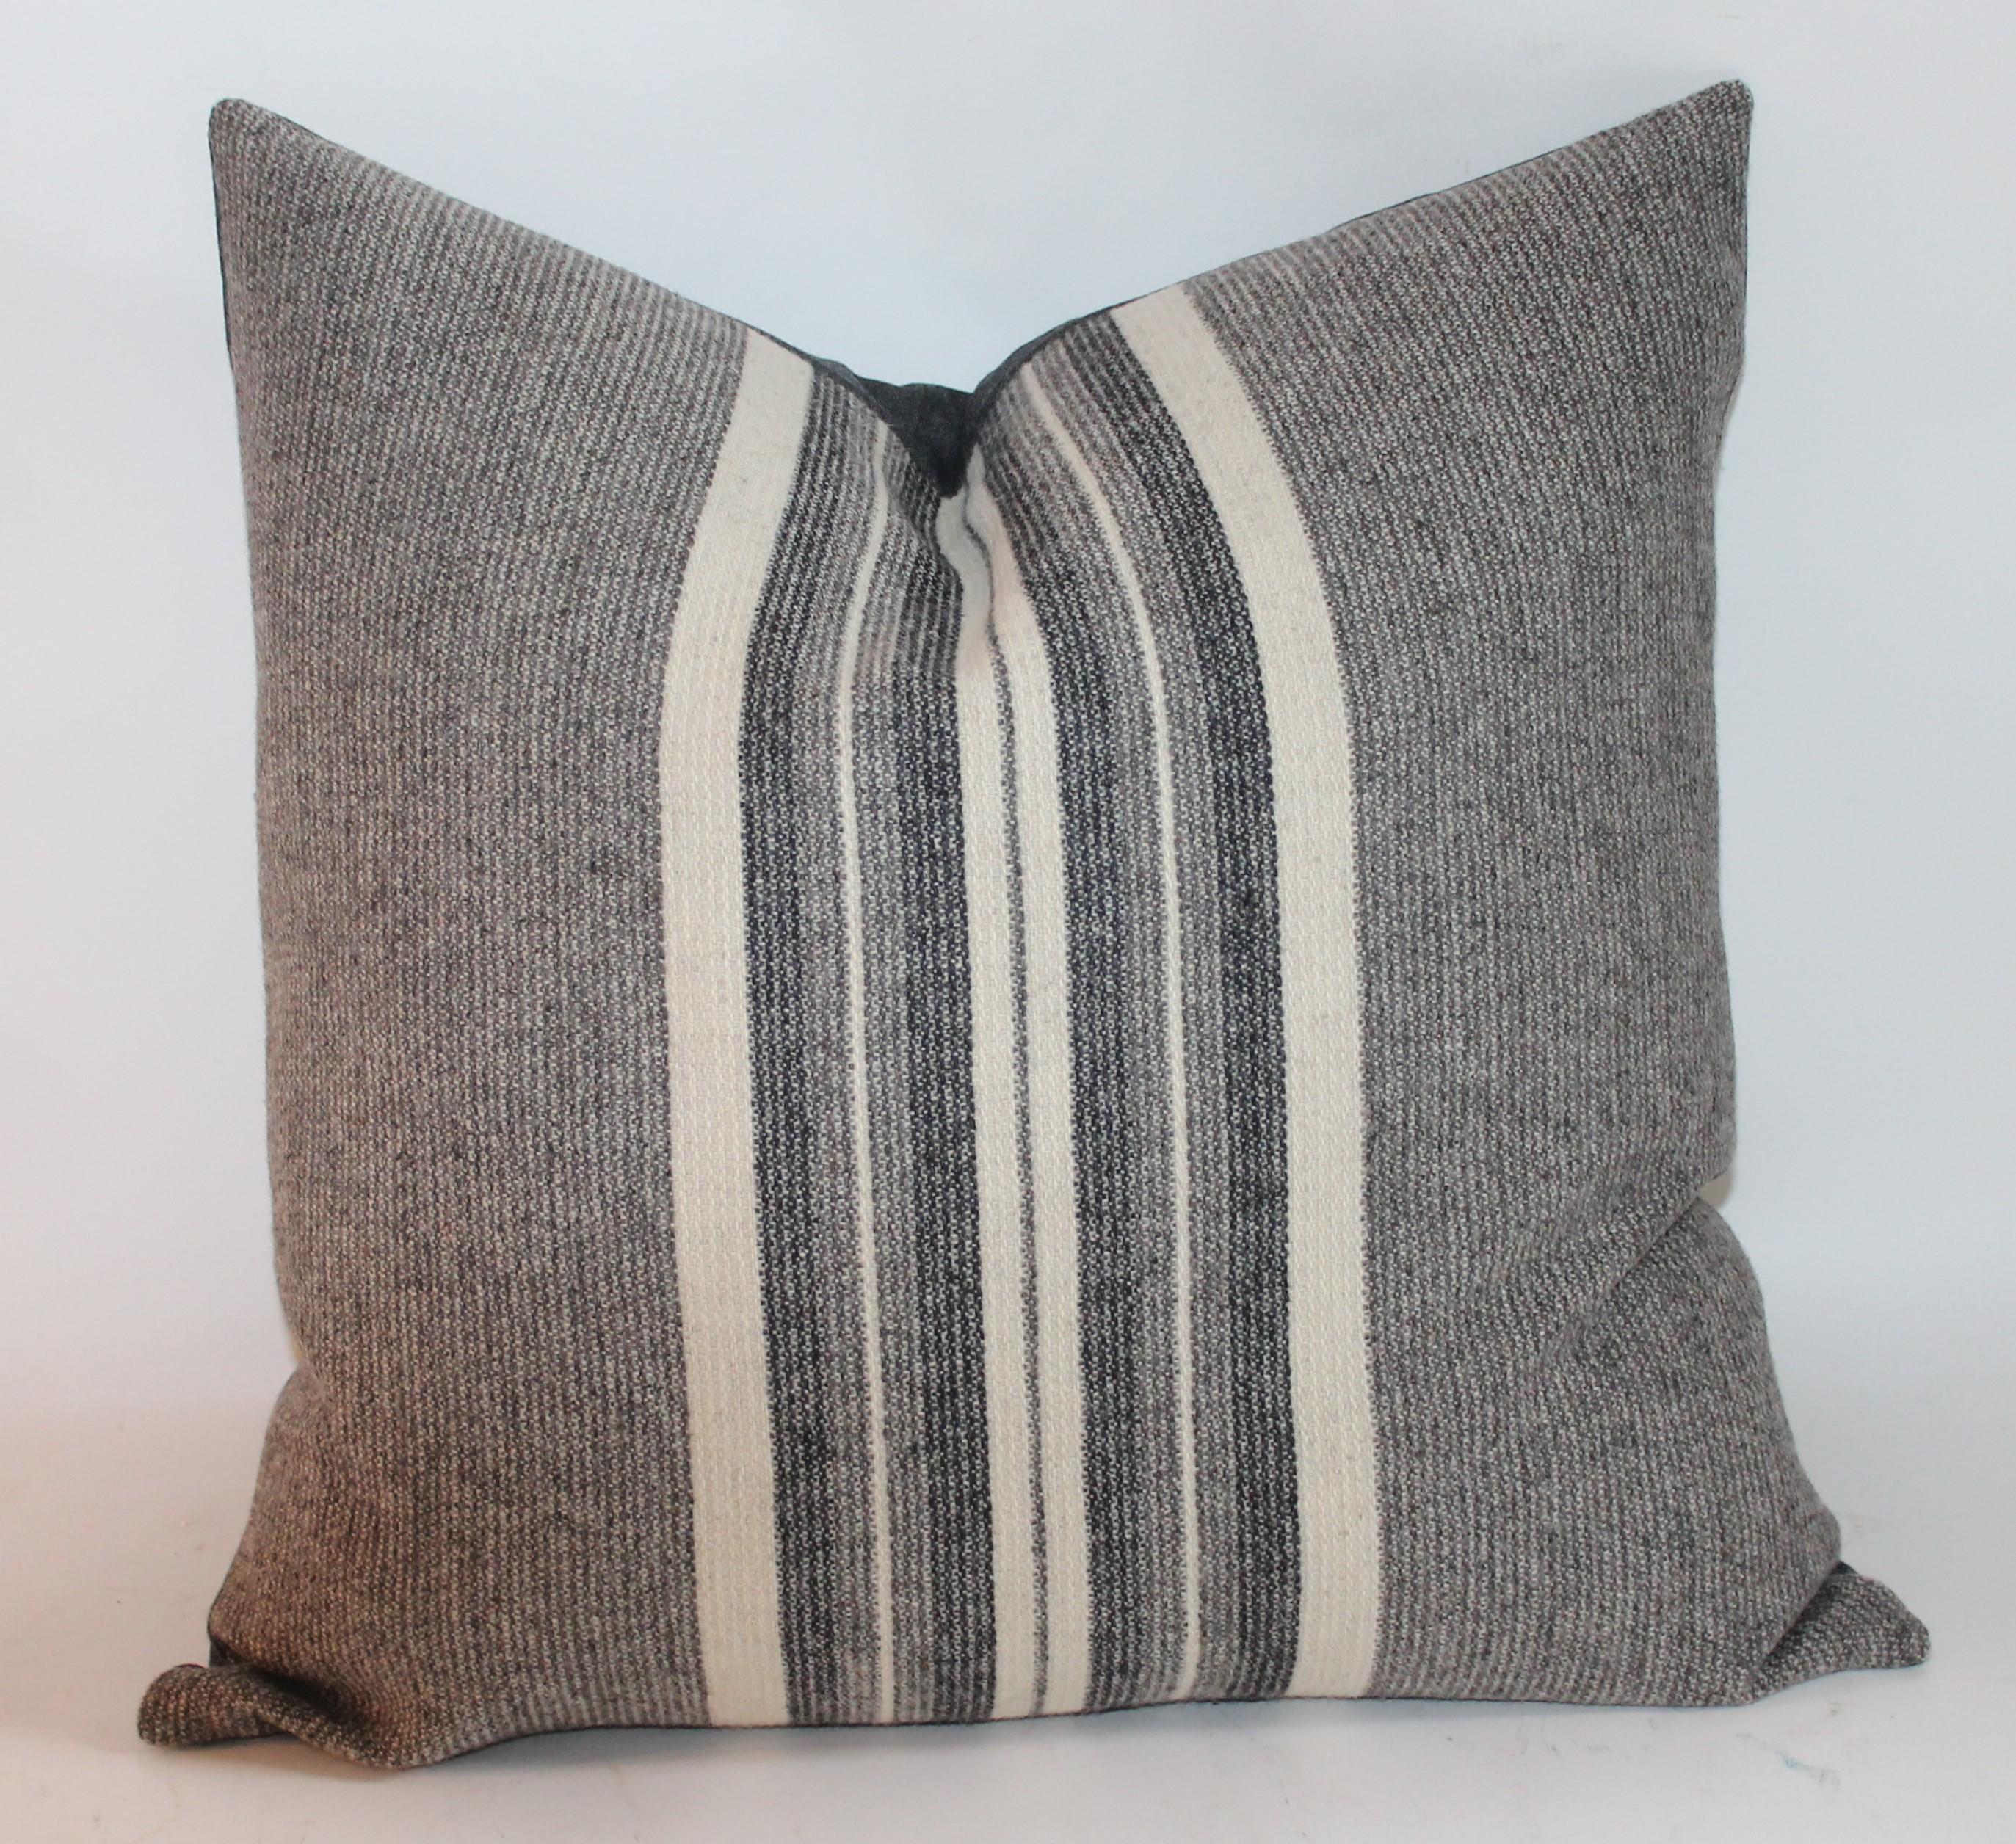 Hand-Crafted Wool Stripe Blanket Pillows Collection, Four